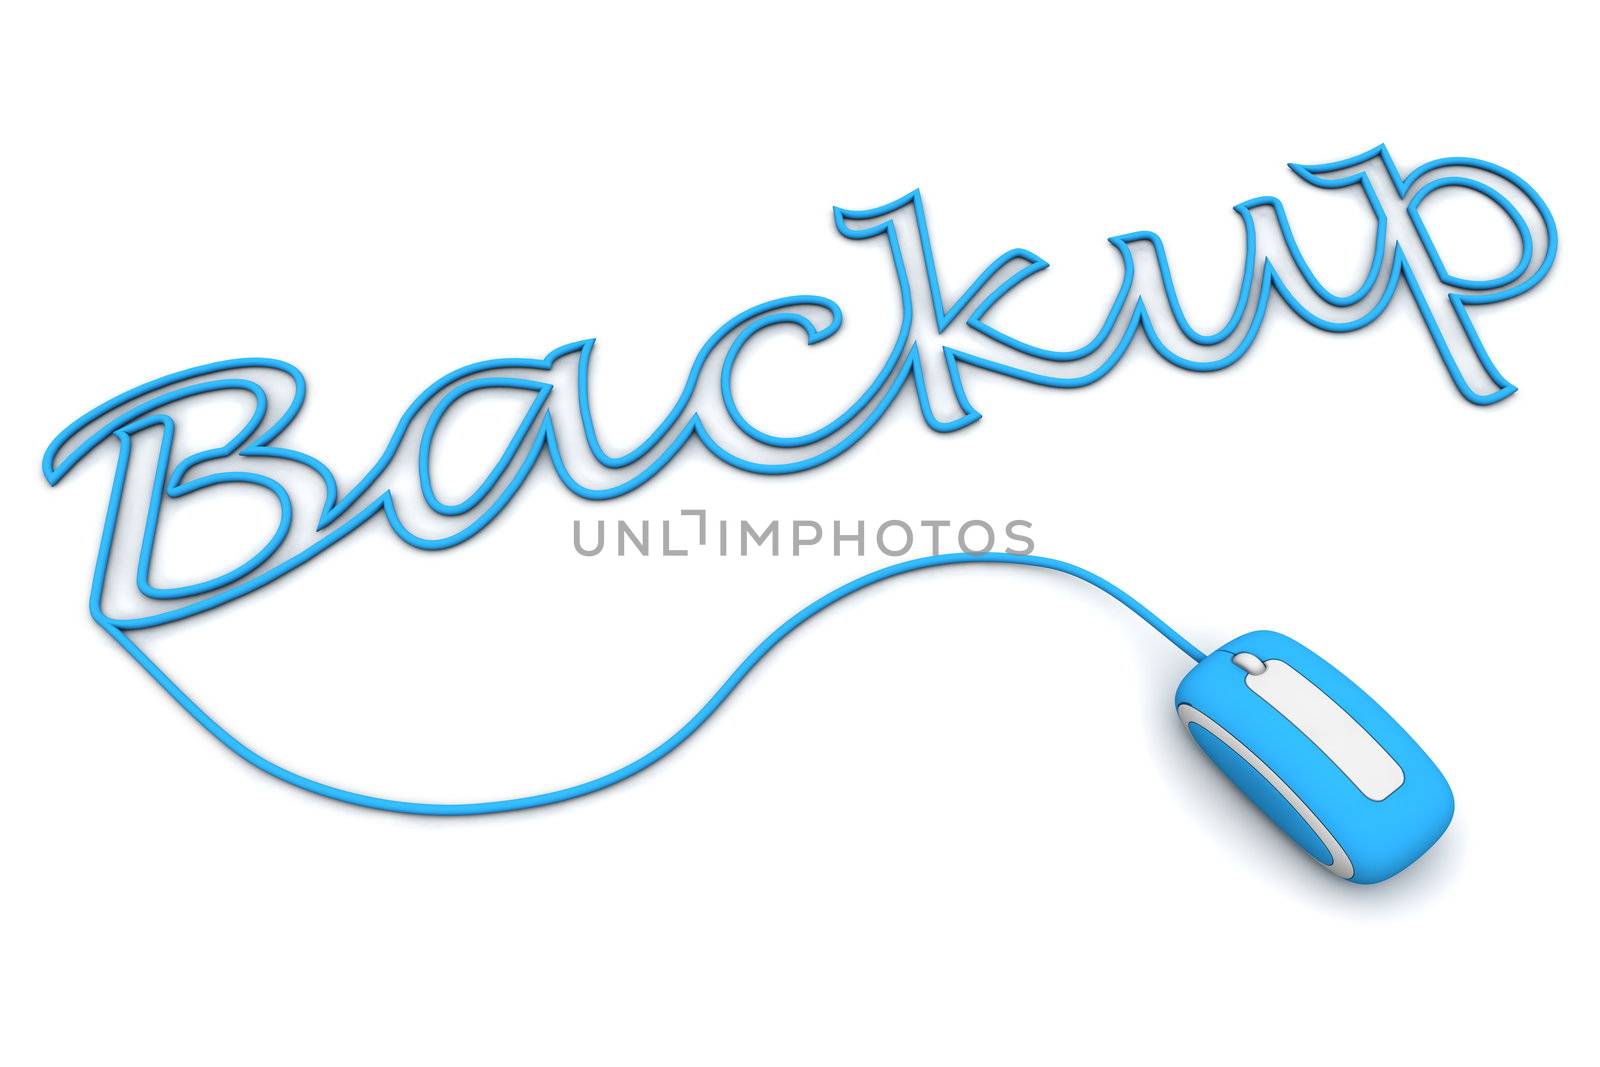 modern blue computer mouse is connected to the blue word BACKUP - letters a formed by the mouse cable